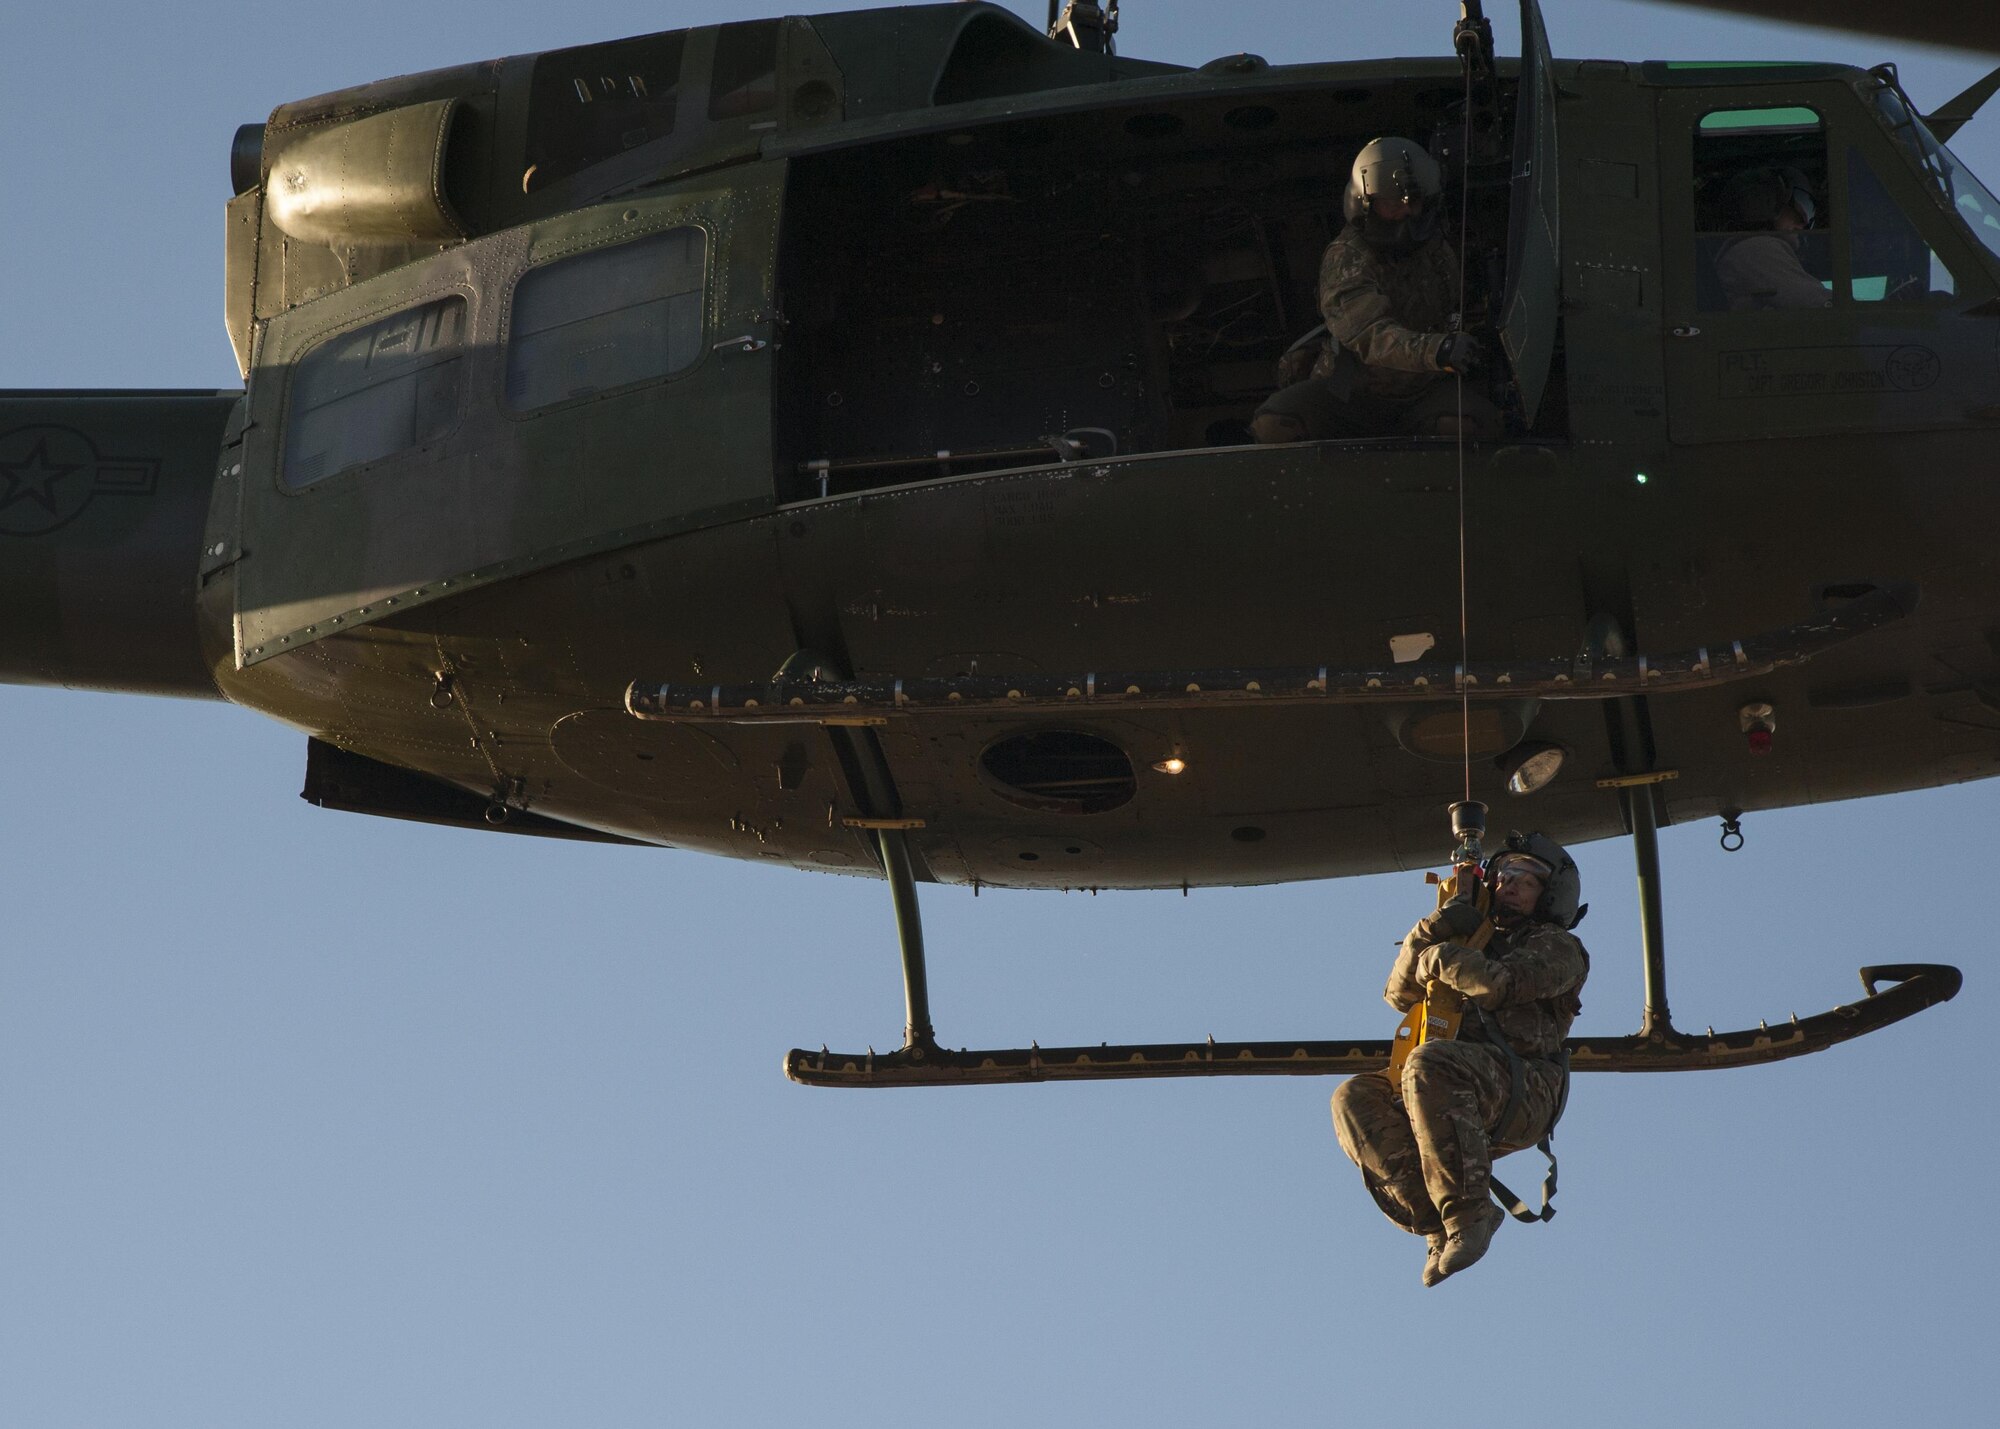 U.S. Air Force Chief Master Sgt. Juliet Gudgel, command chief master sergeant of Air Education and Training Command, is lifted into a UH-1H Huey during a rescue training scenario at Kirtland Air Force Base, N.M., Nov. 27, 2017. On her second day of the visit, Gudgel was able to participate in four training missions with the Airmen of the 58th SOW. (U.S. Air Force photo by Staff Sgt. J.D. Strong II)